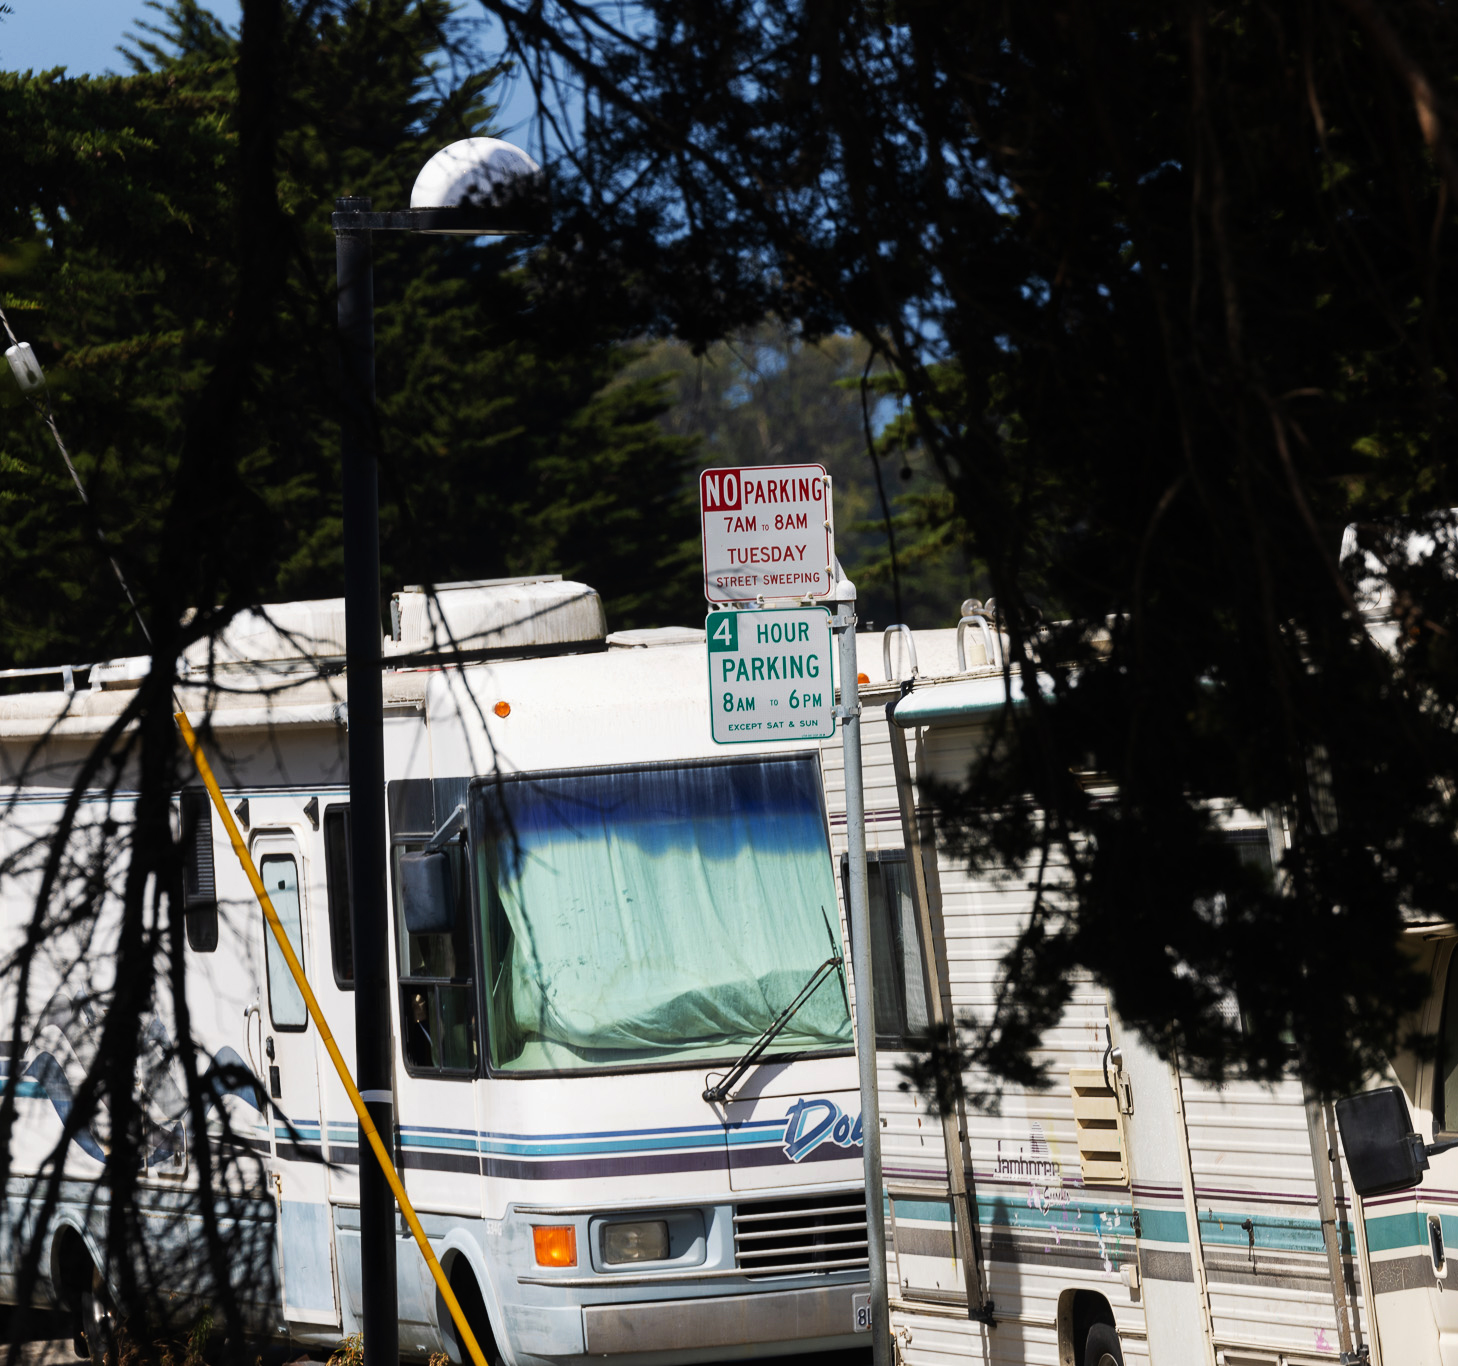 The image shows an RV parked on the street, partially obscured by trees. There are parking restriction signs indicating no parking on Tuesdays from 7-8 AM and a four-hour limit from 8 AM to 6 PM.